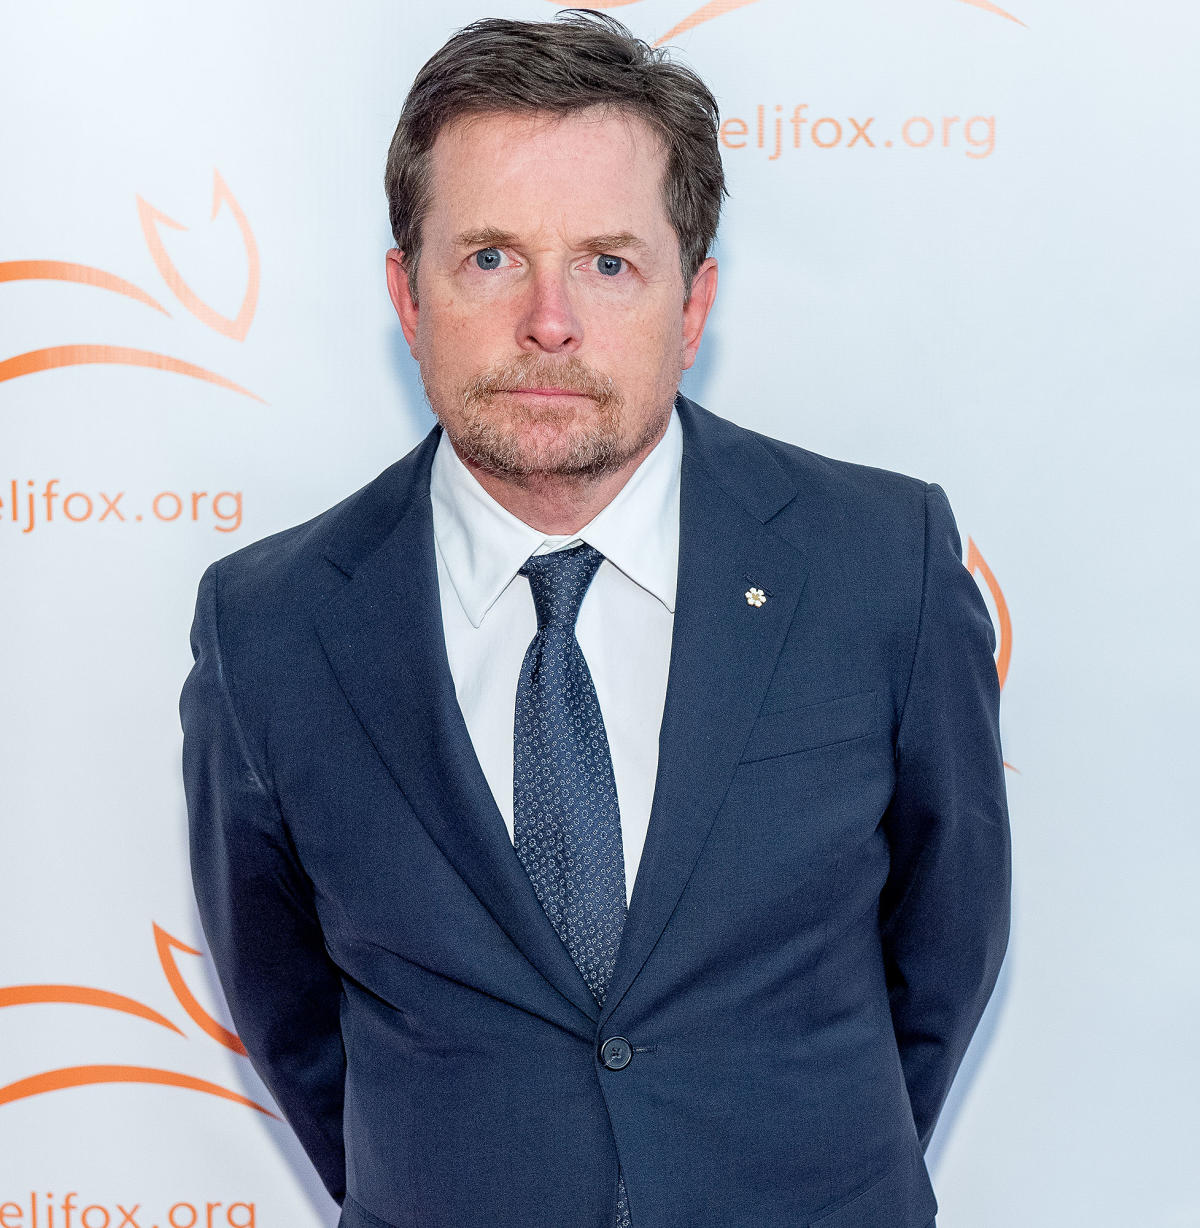 Michael J. Fox Opens Up About Dealing with New Health Problems ‘Such a